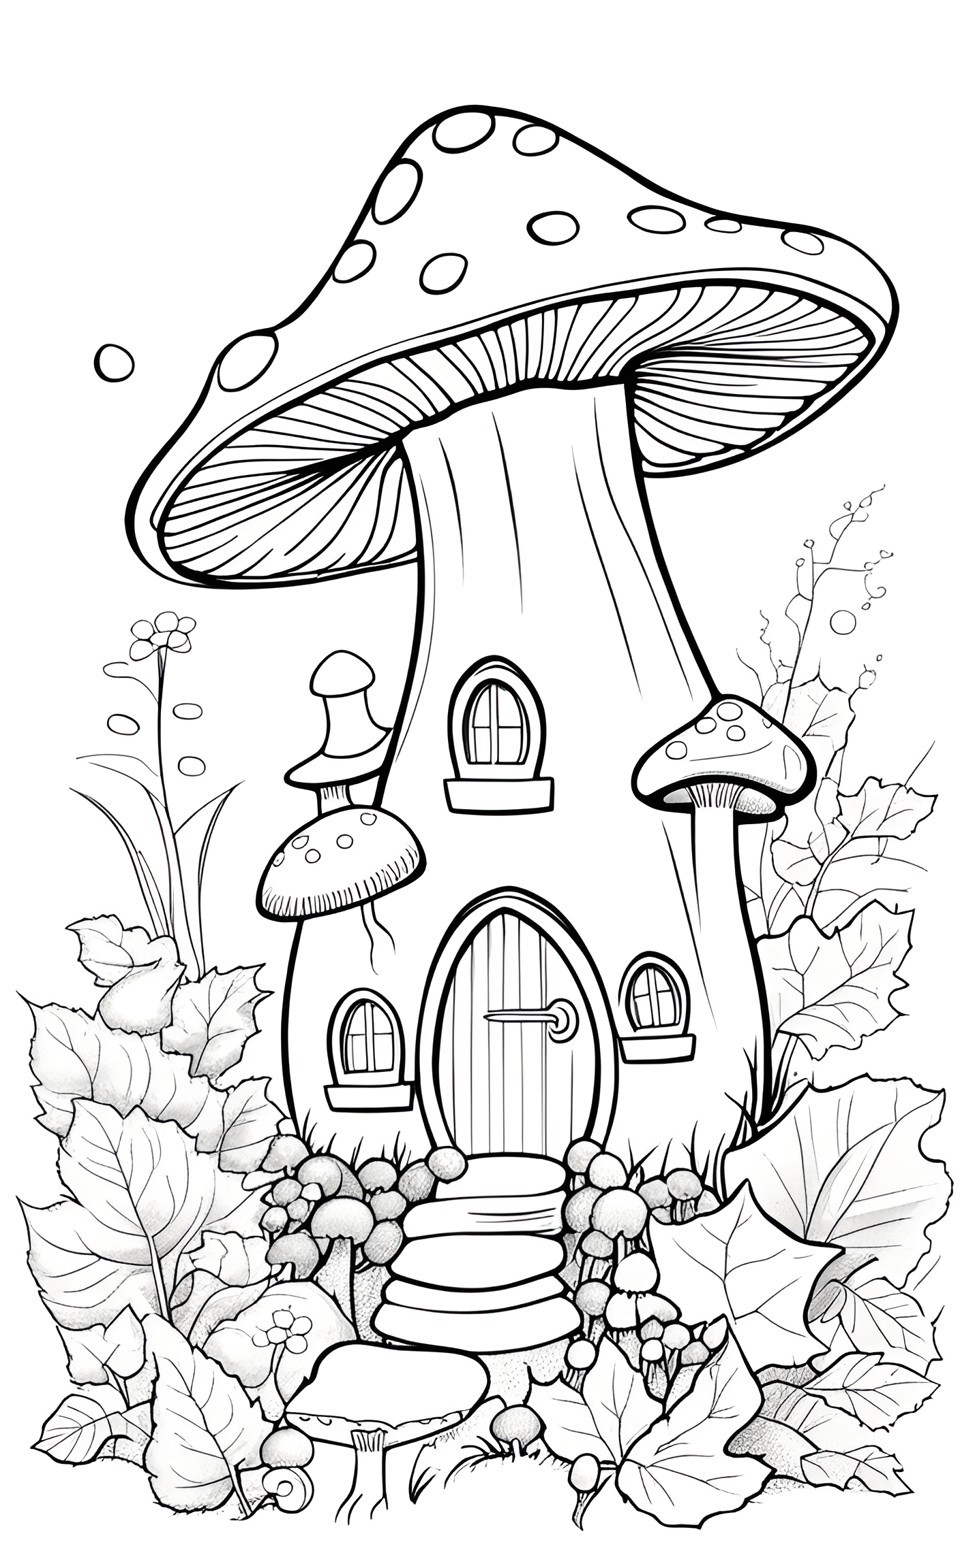 Simple Fantasy Mushroom coloring pages for kids